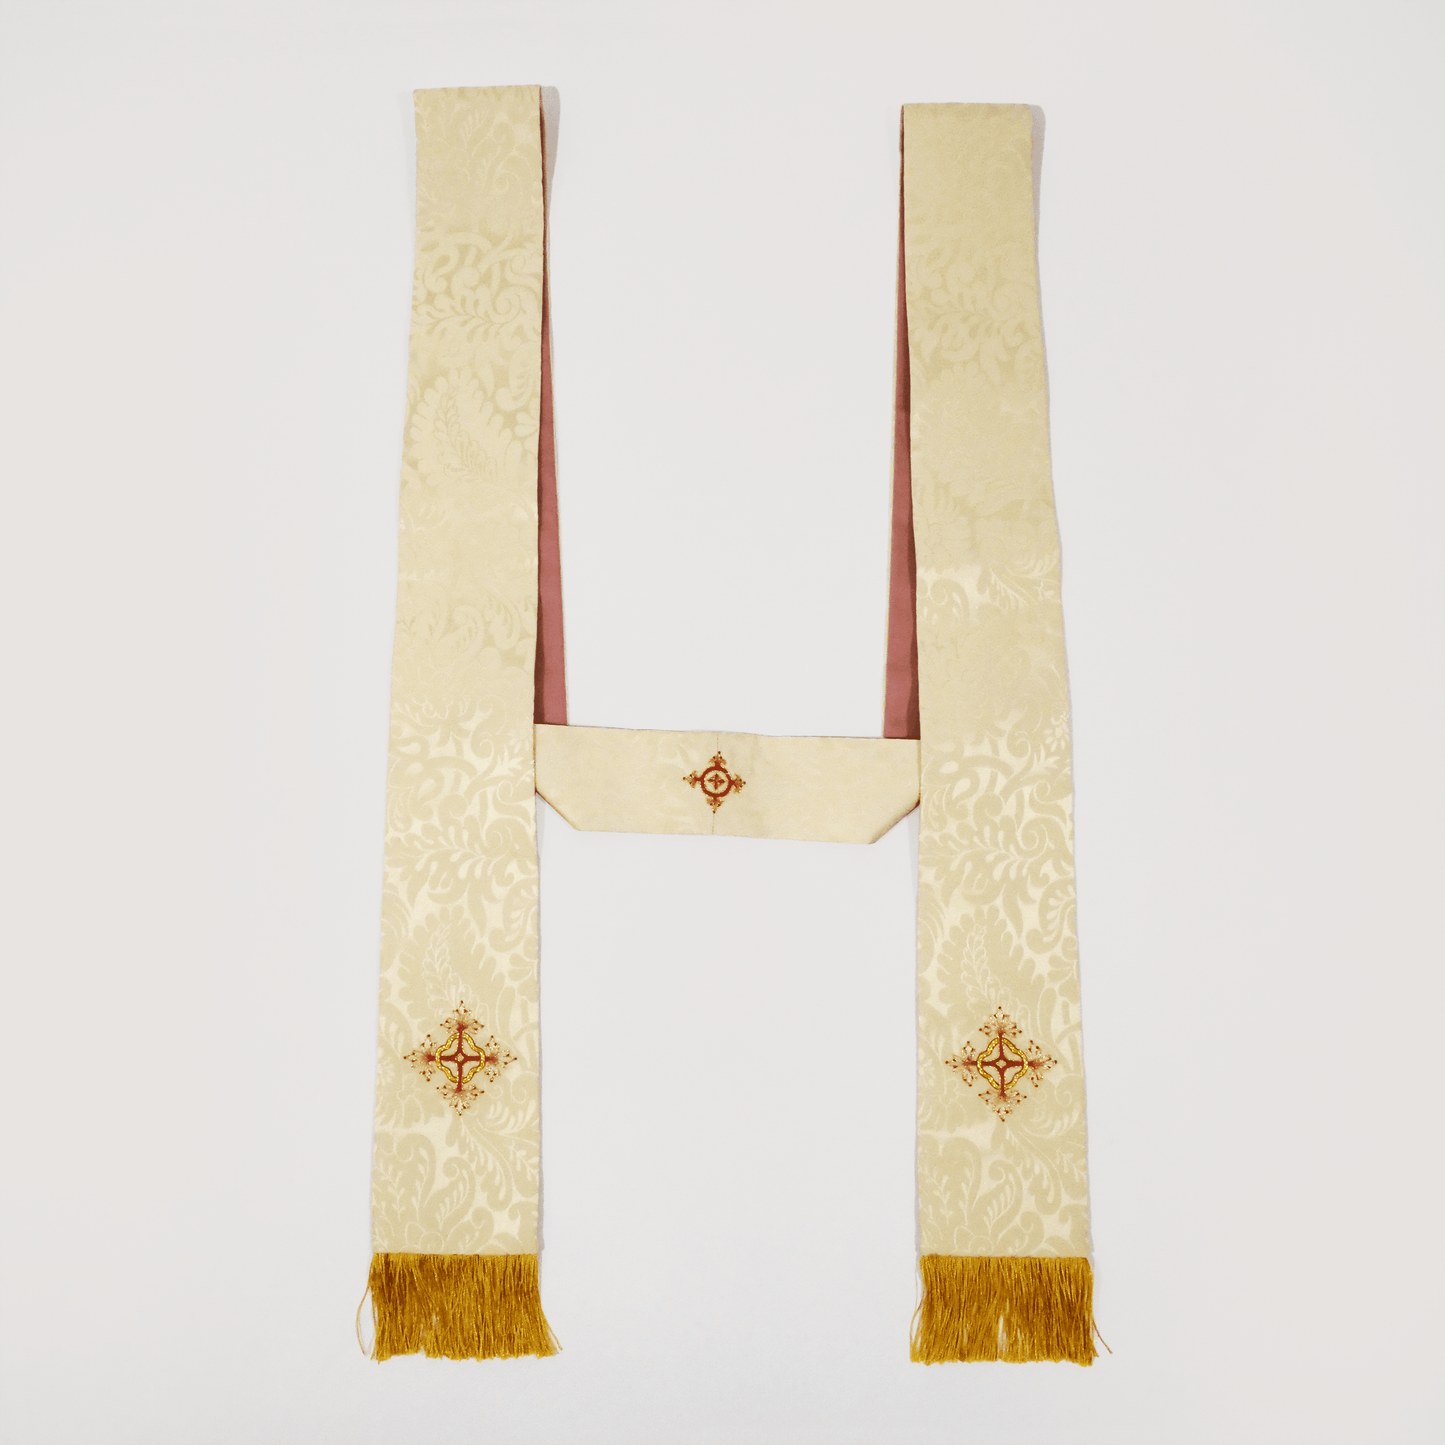 Stole in Cream 'Holbein' with Hand Embroidered Crosses - Watts & Co.